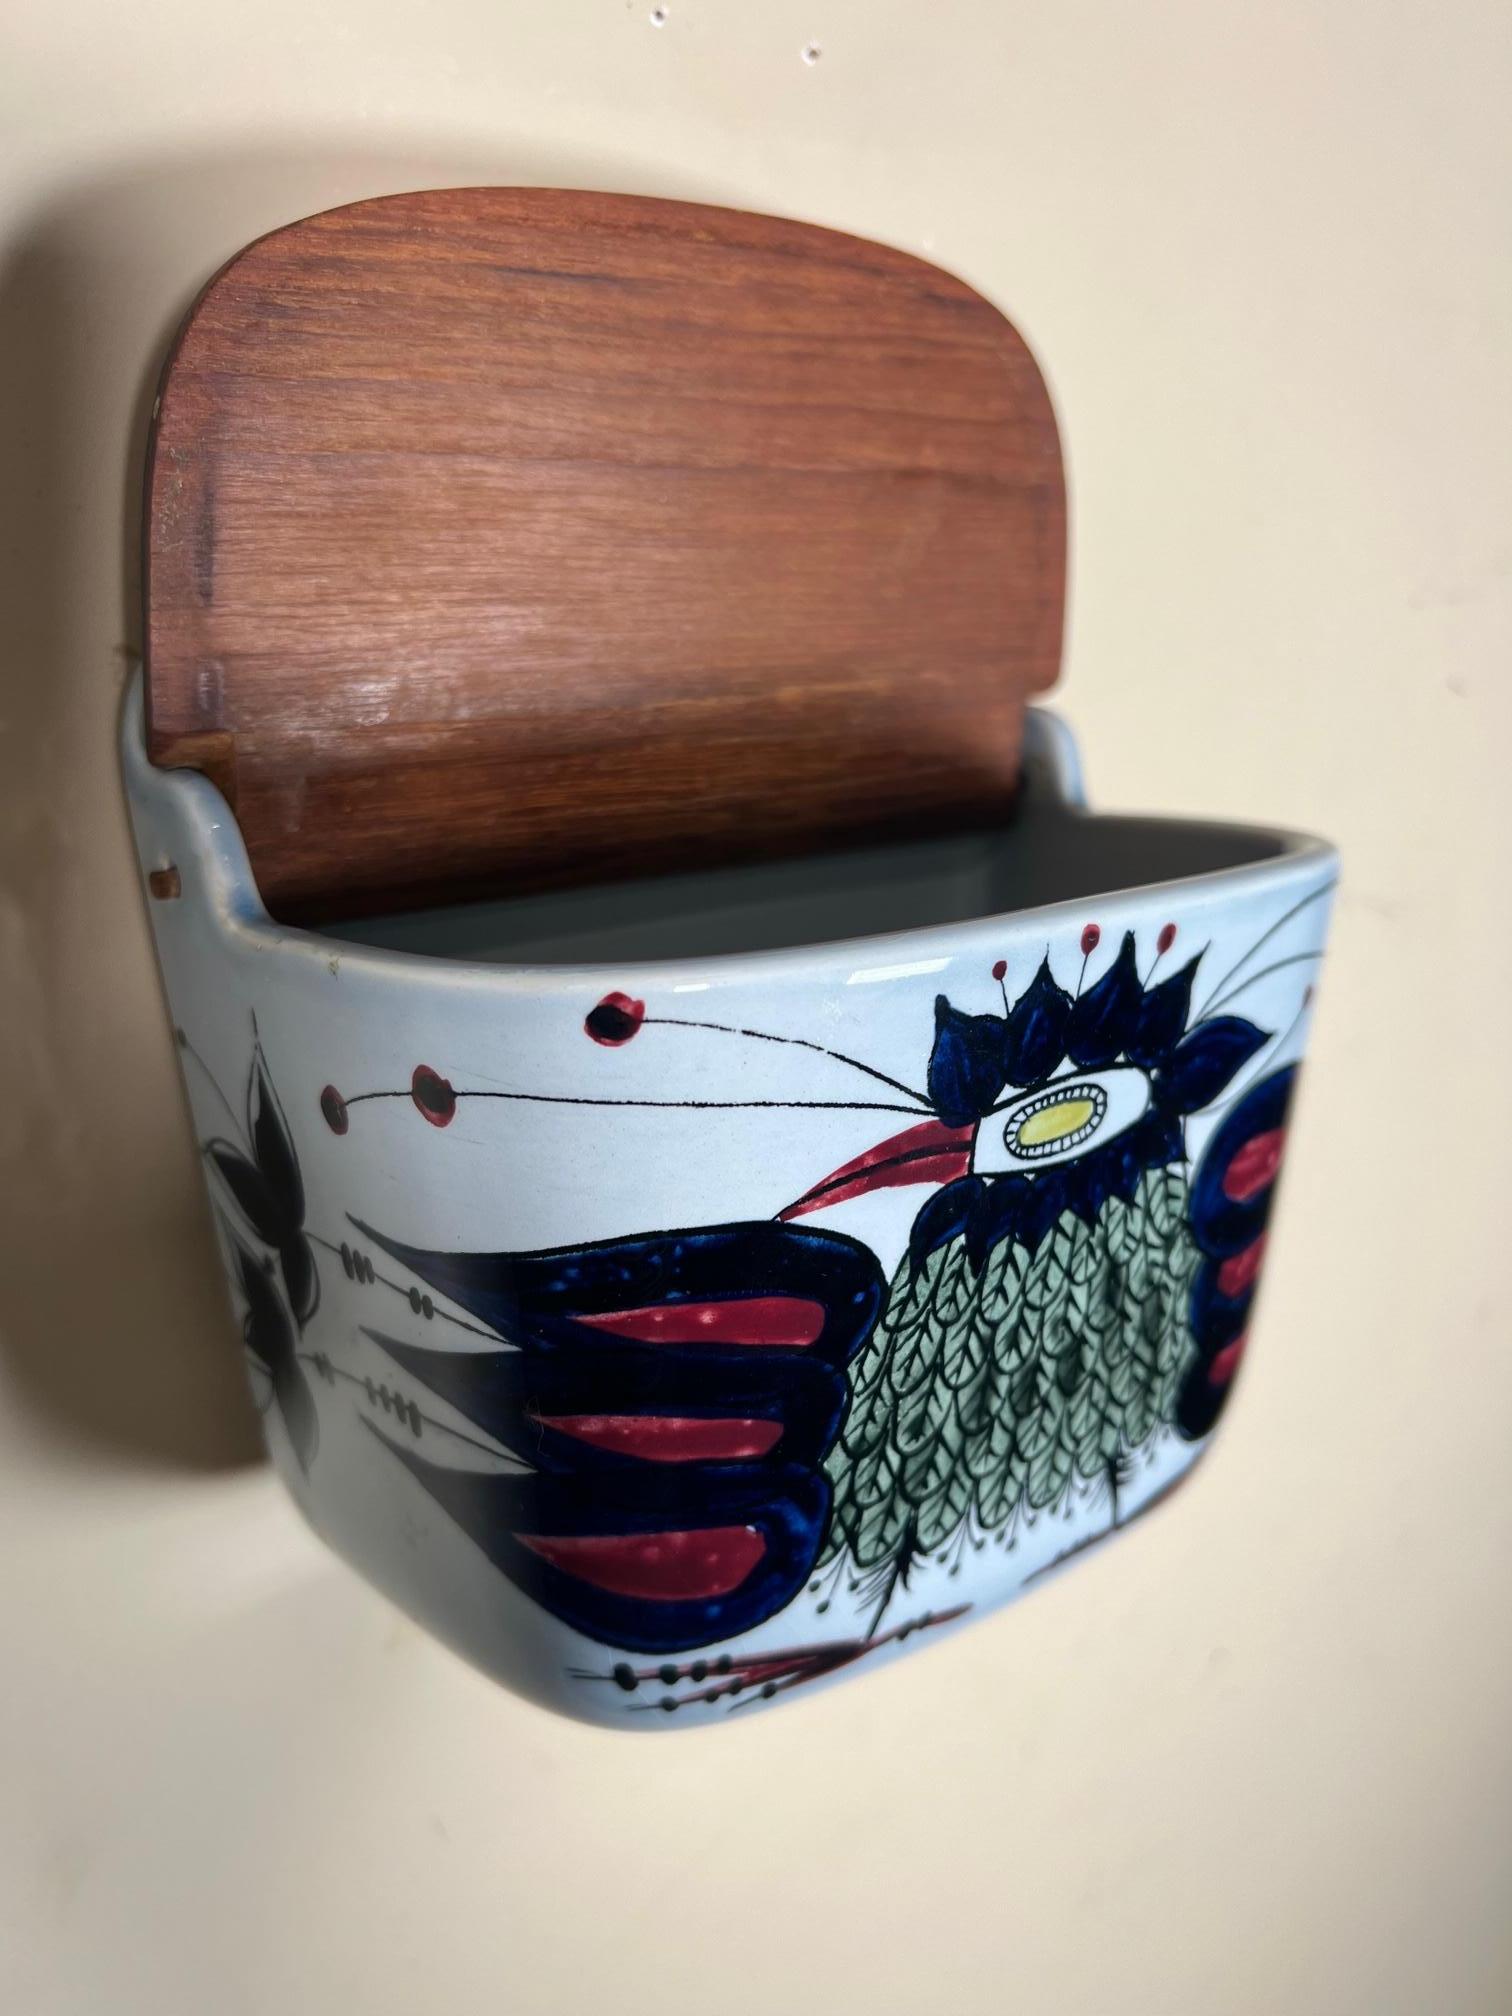 Danish ceramic wall mounted salt box by Royal Copenhagen. Original stamp at the back. With wooden lid. Fajance (tin-glazed earthenware ceramic). Numbered 132/261
Very good condition. Small mark on lid. Looks like a small burn mark. 
Dimensions: 6